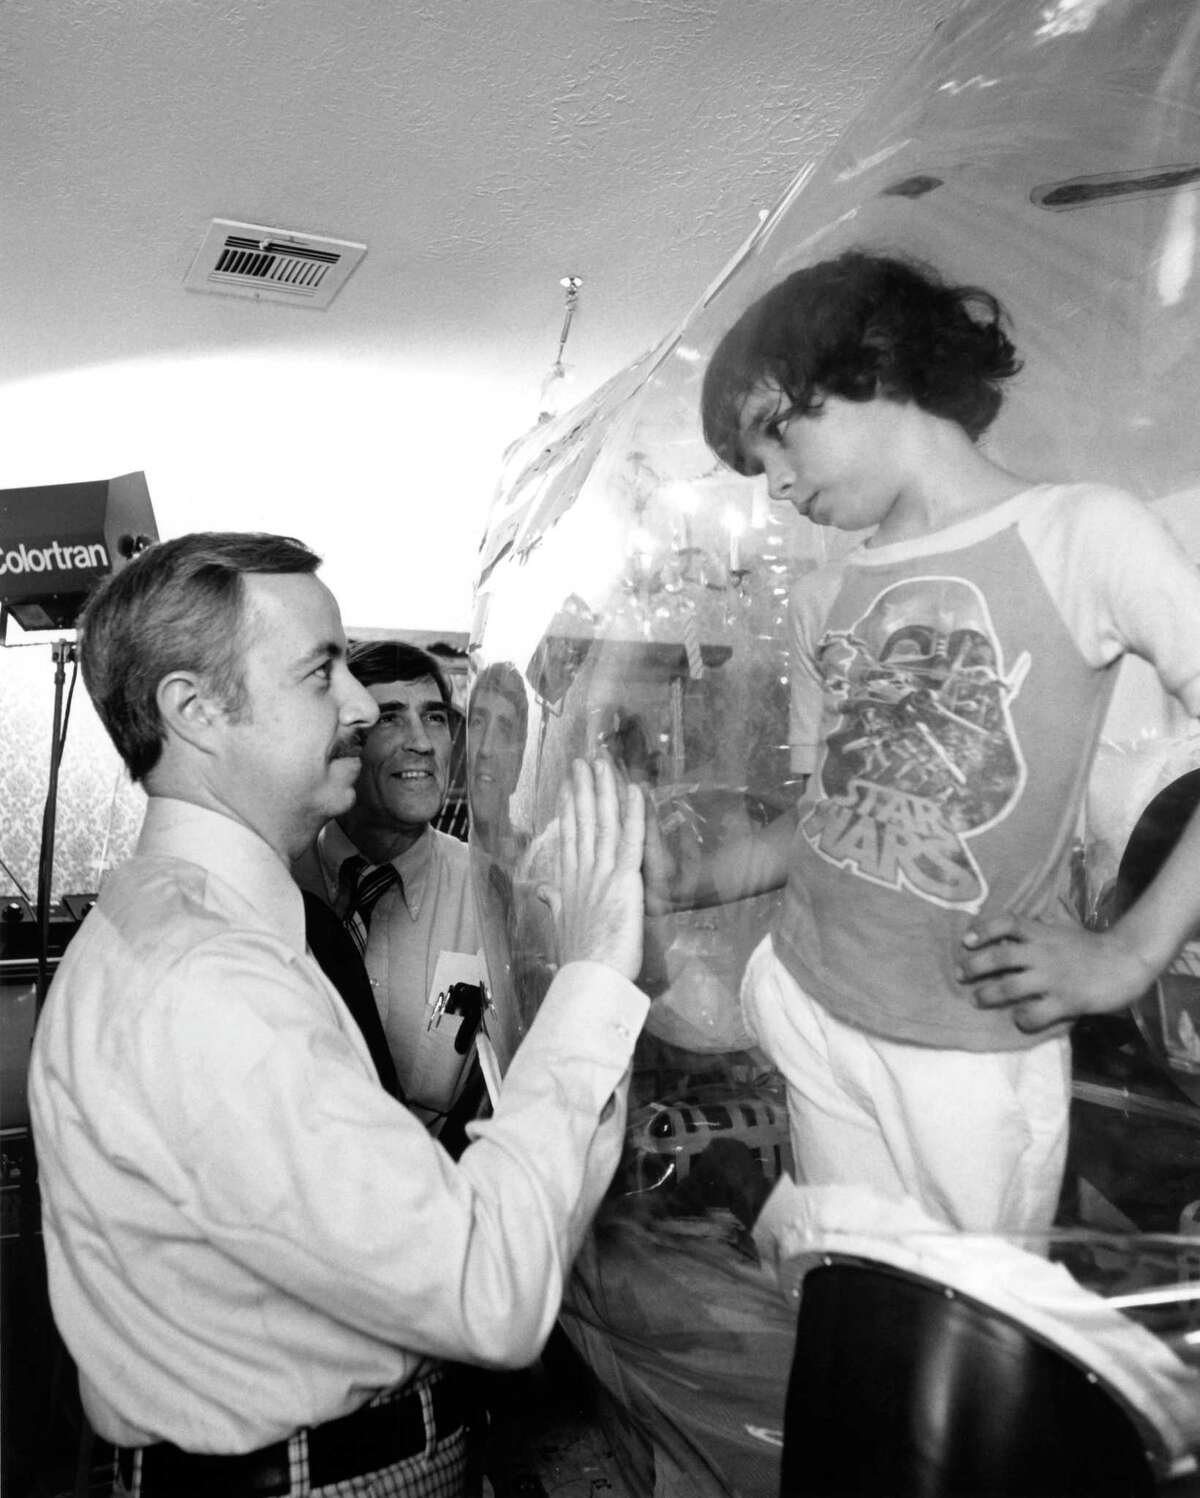 Dr. William Shearer visits with his patient, "Bubble Boy" David Vetter, at Texas Children's Hospital in 1979. David died in 1984 at age 12.